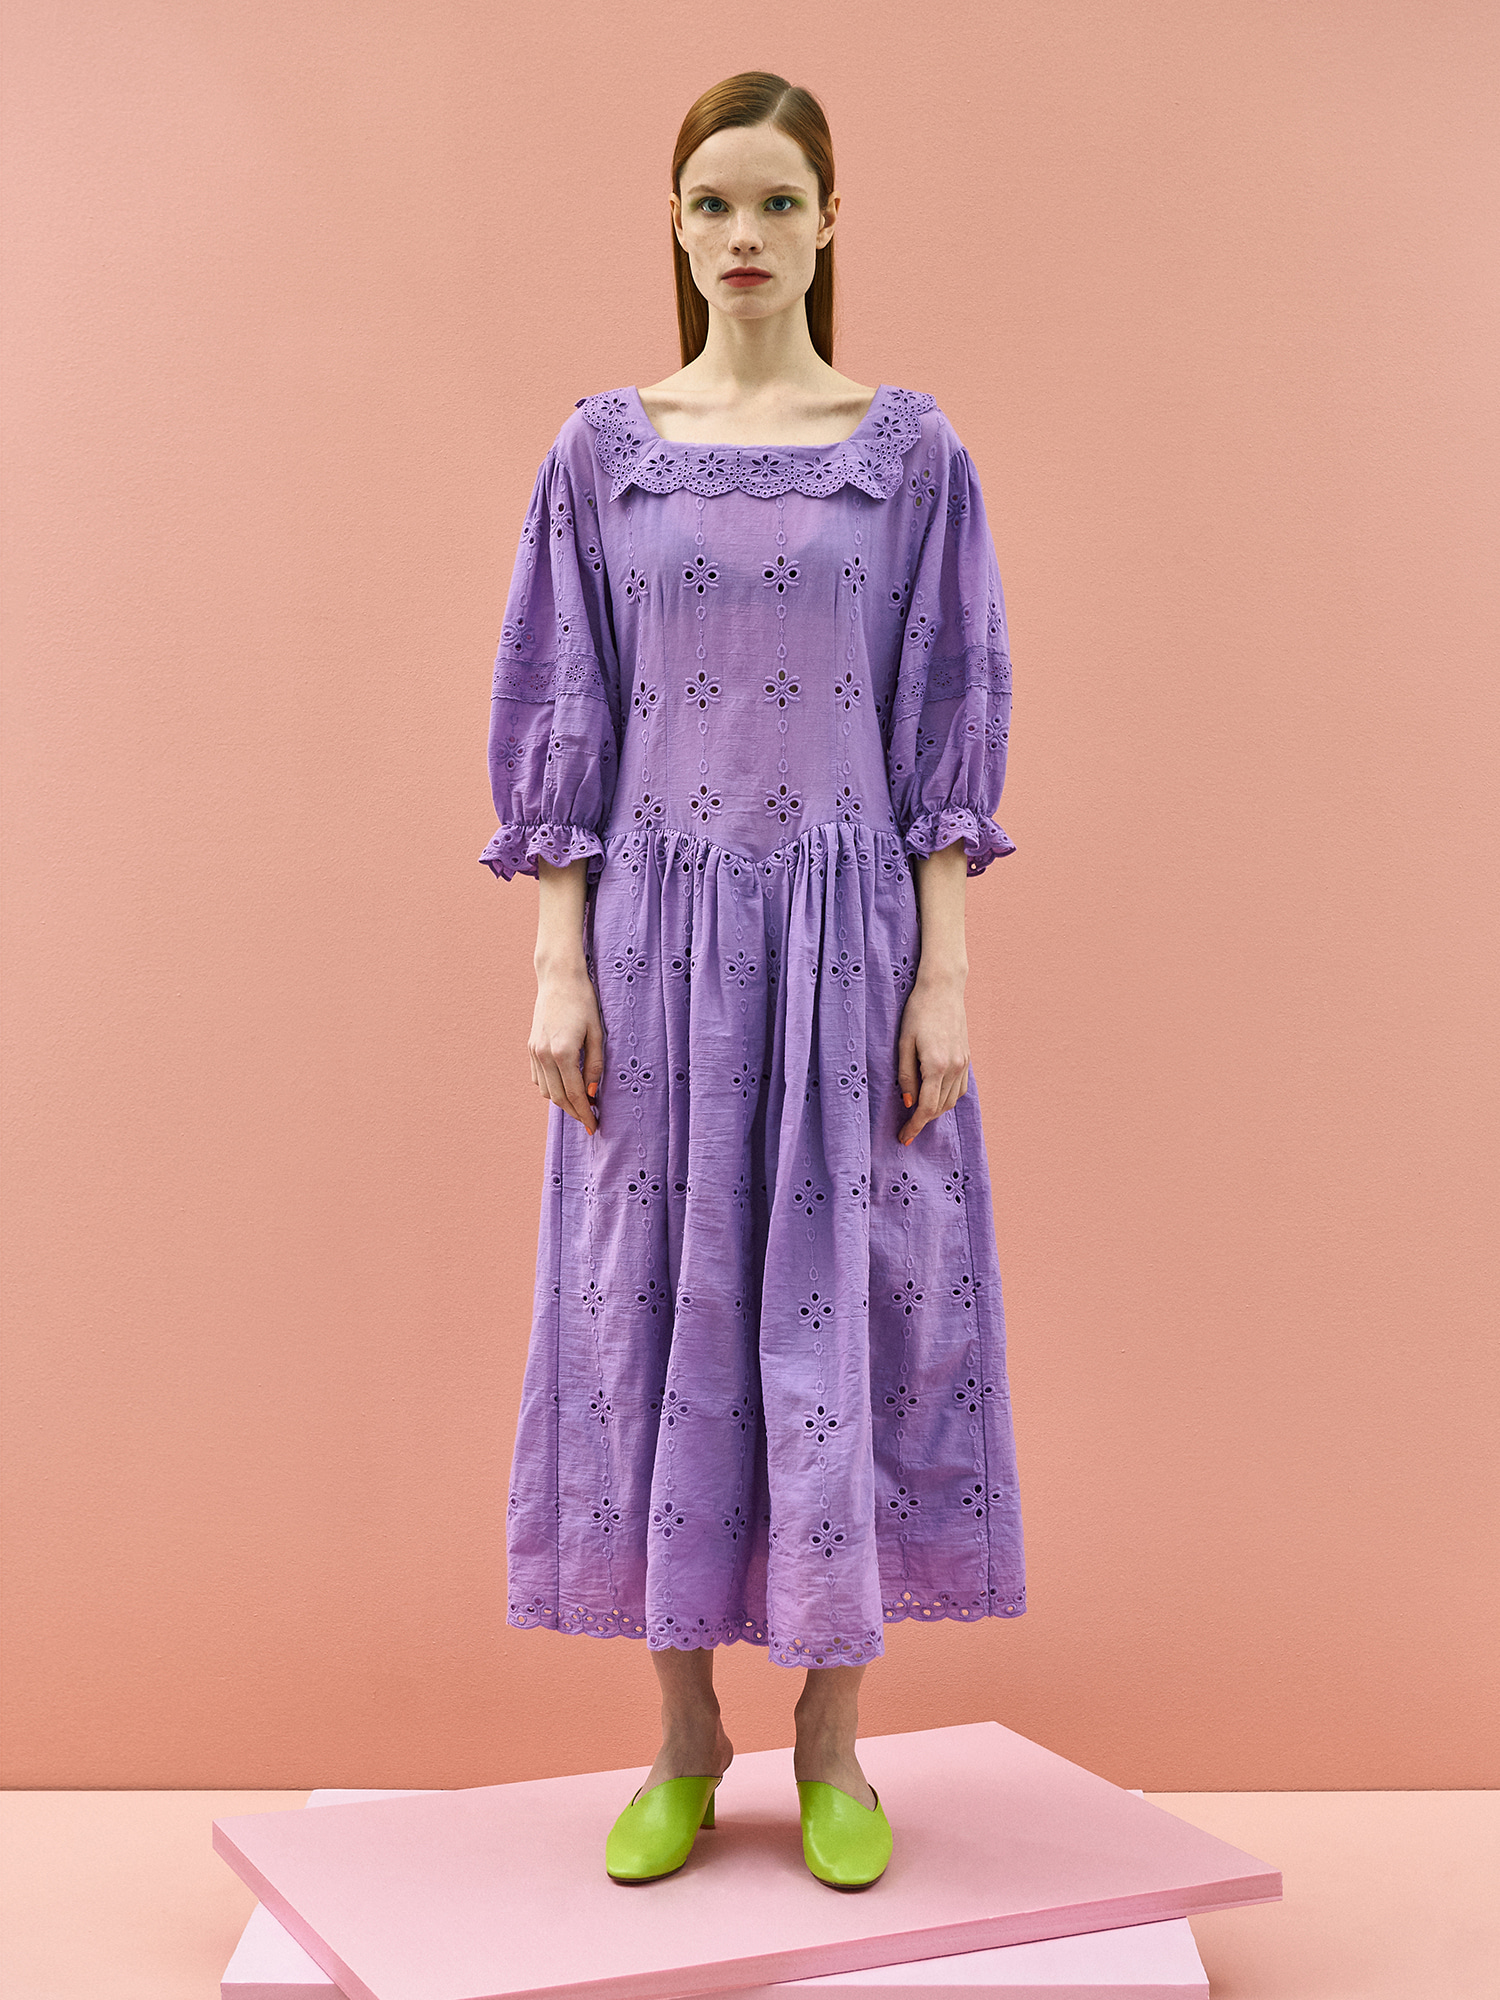 [B품]Girlish Lace Cotton Dress in Purple